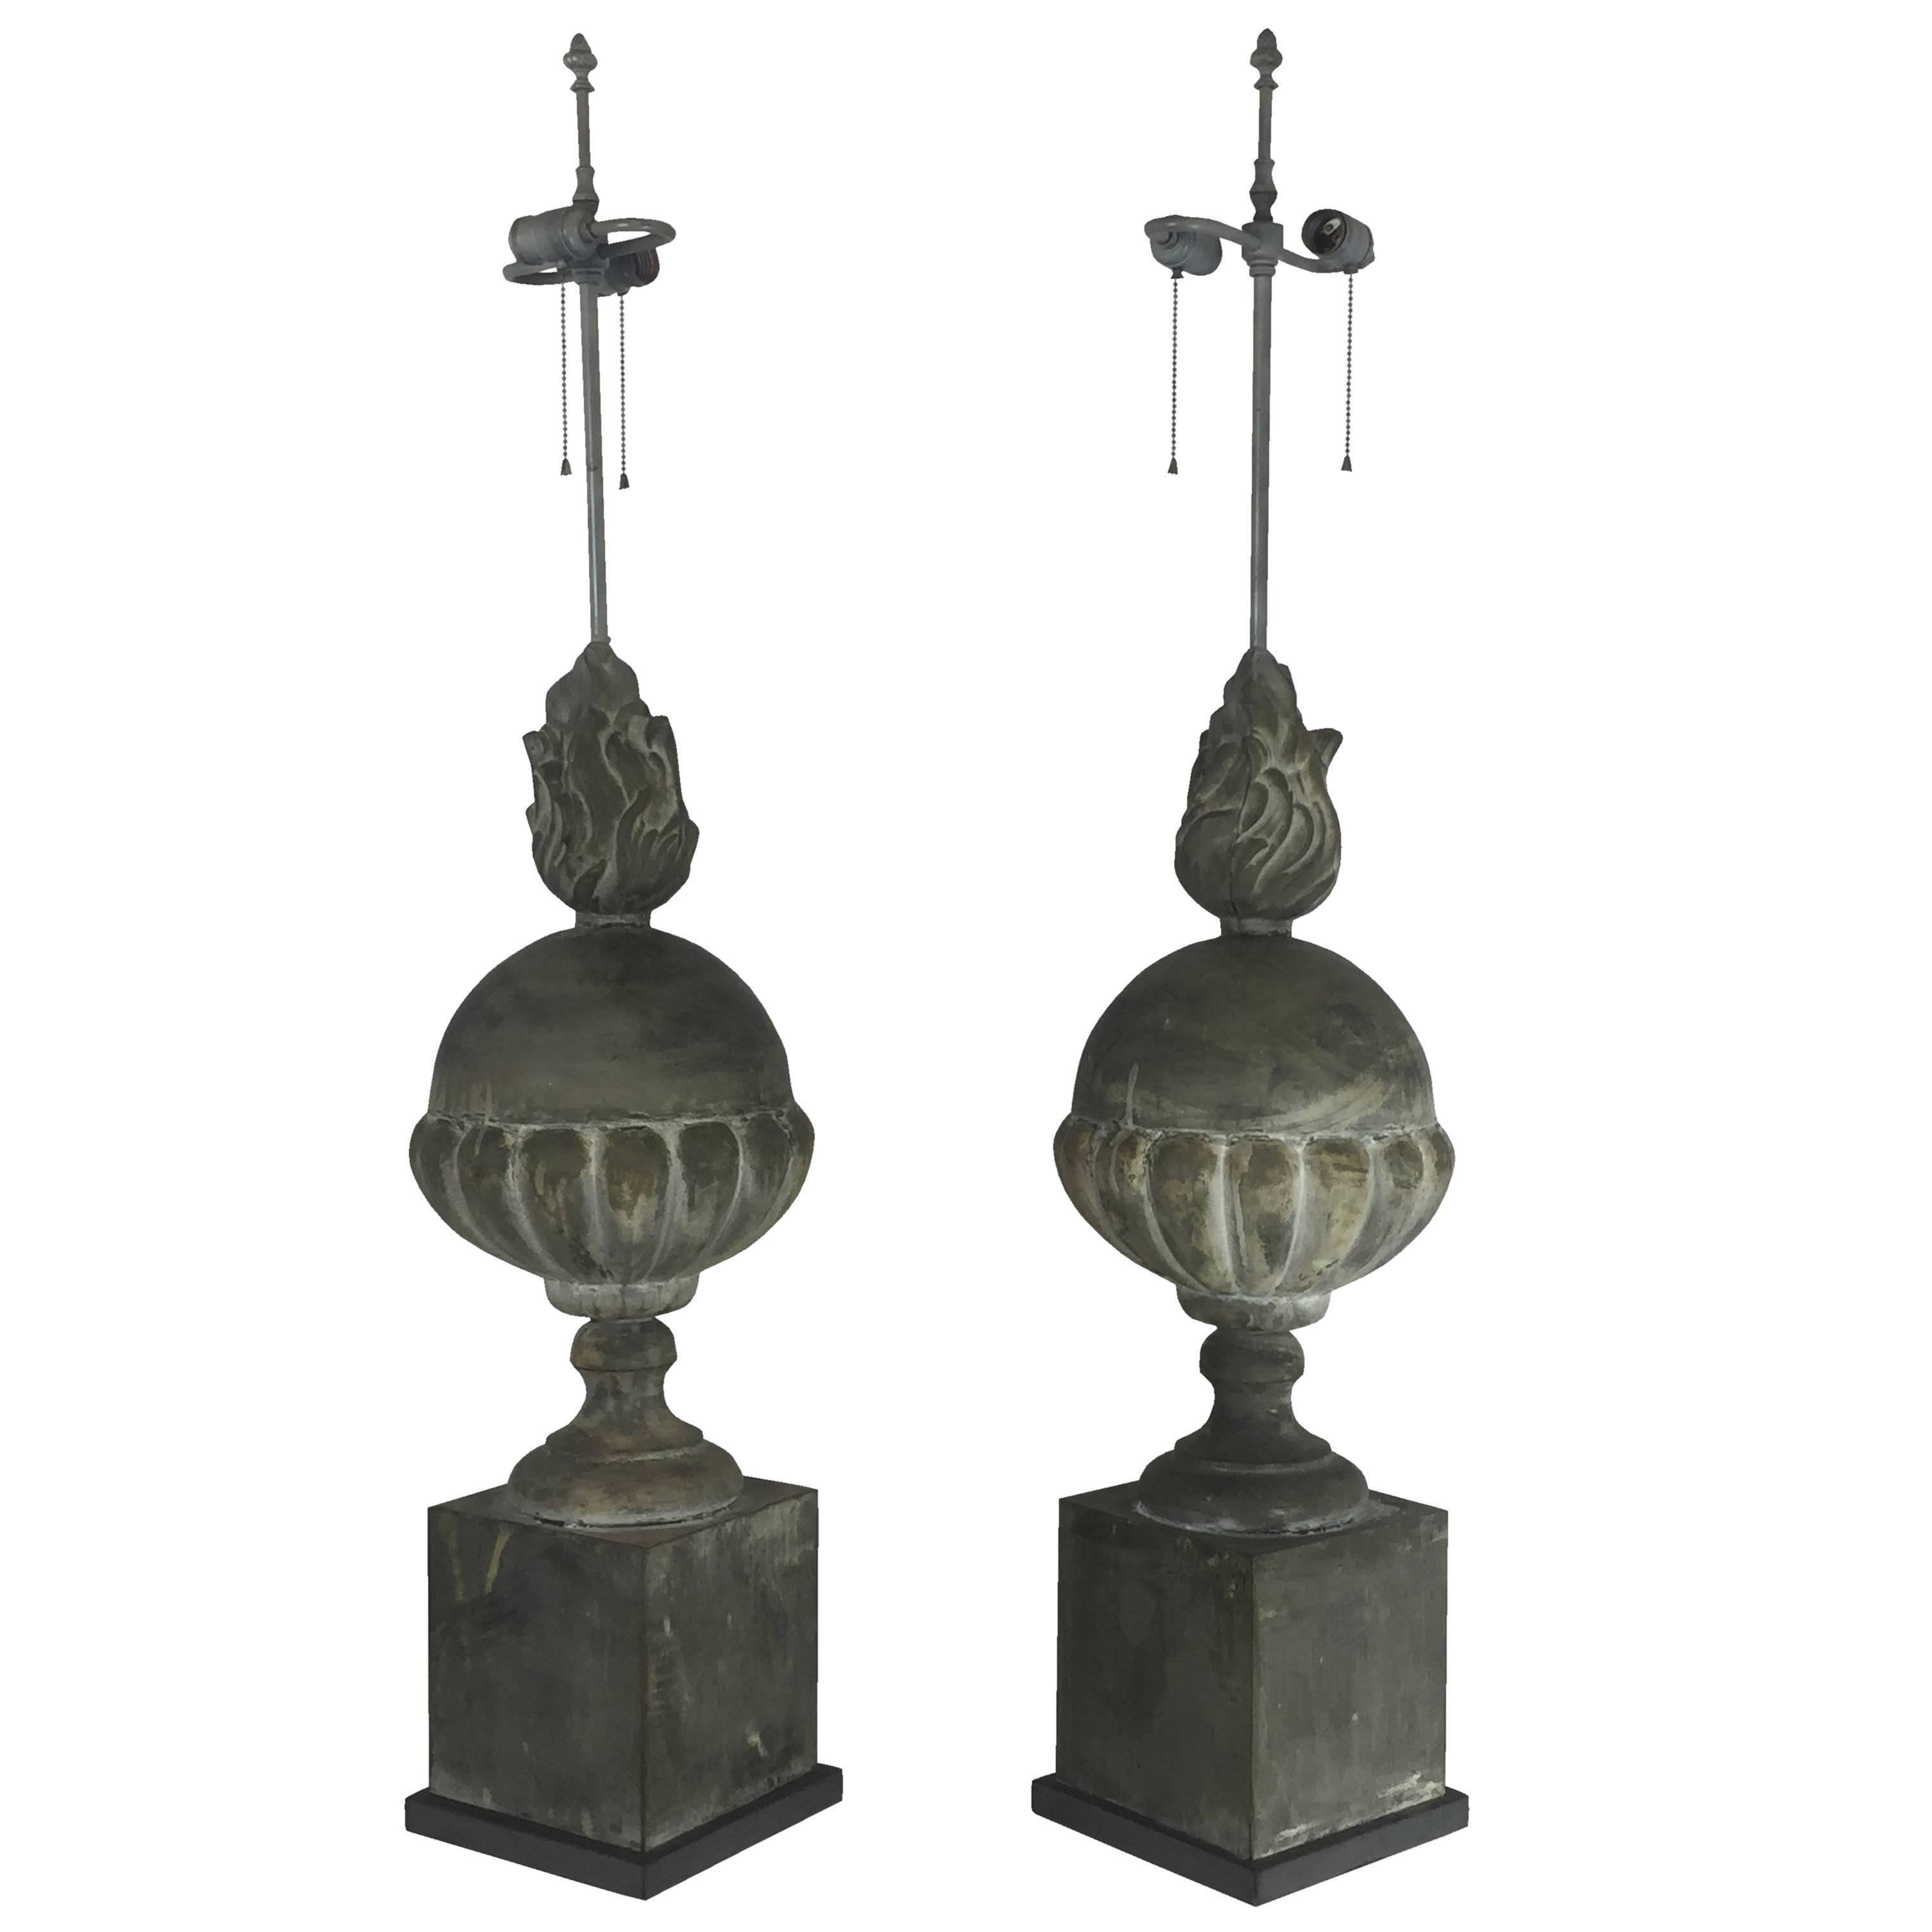 Architectural Zinc Table Lamps of a Substantial Size in the Style of Parzinger